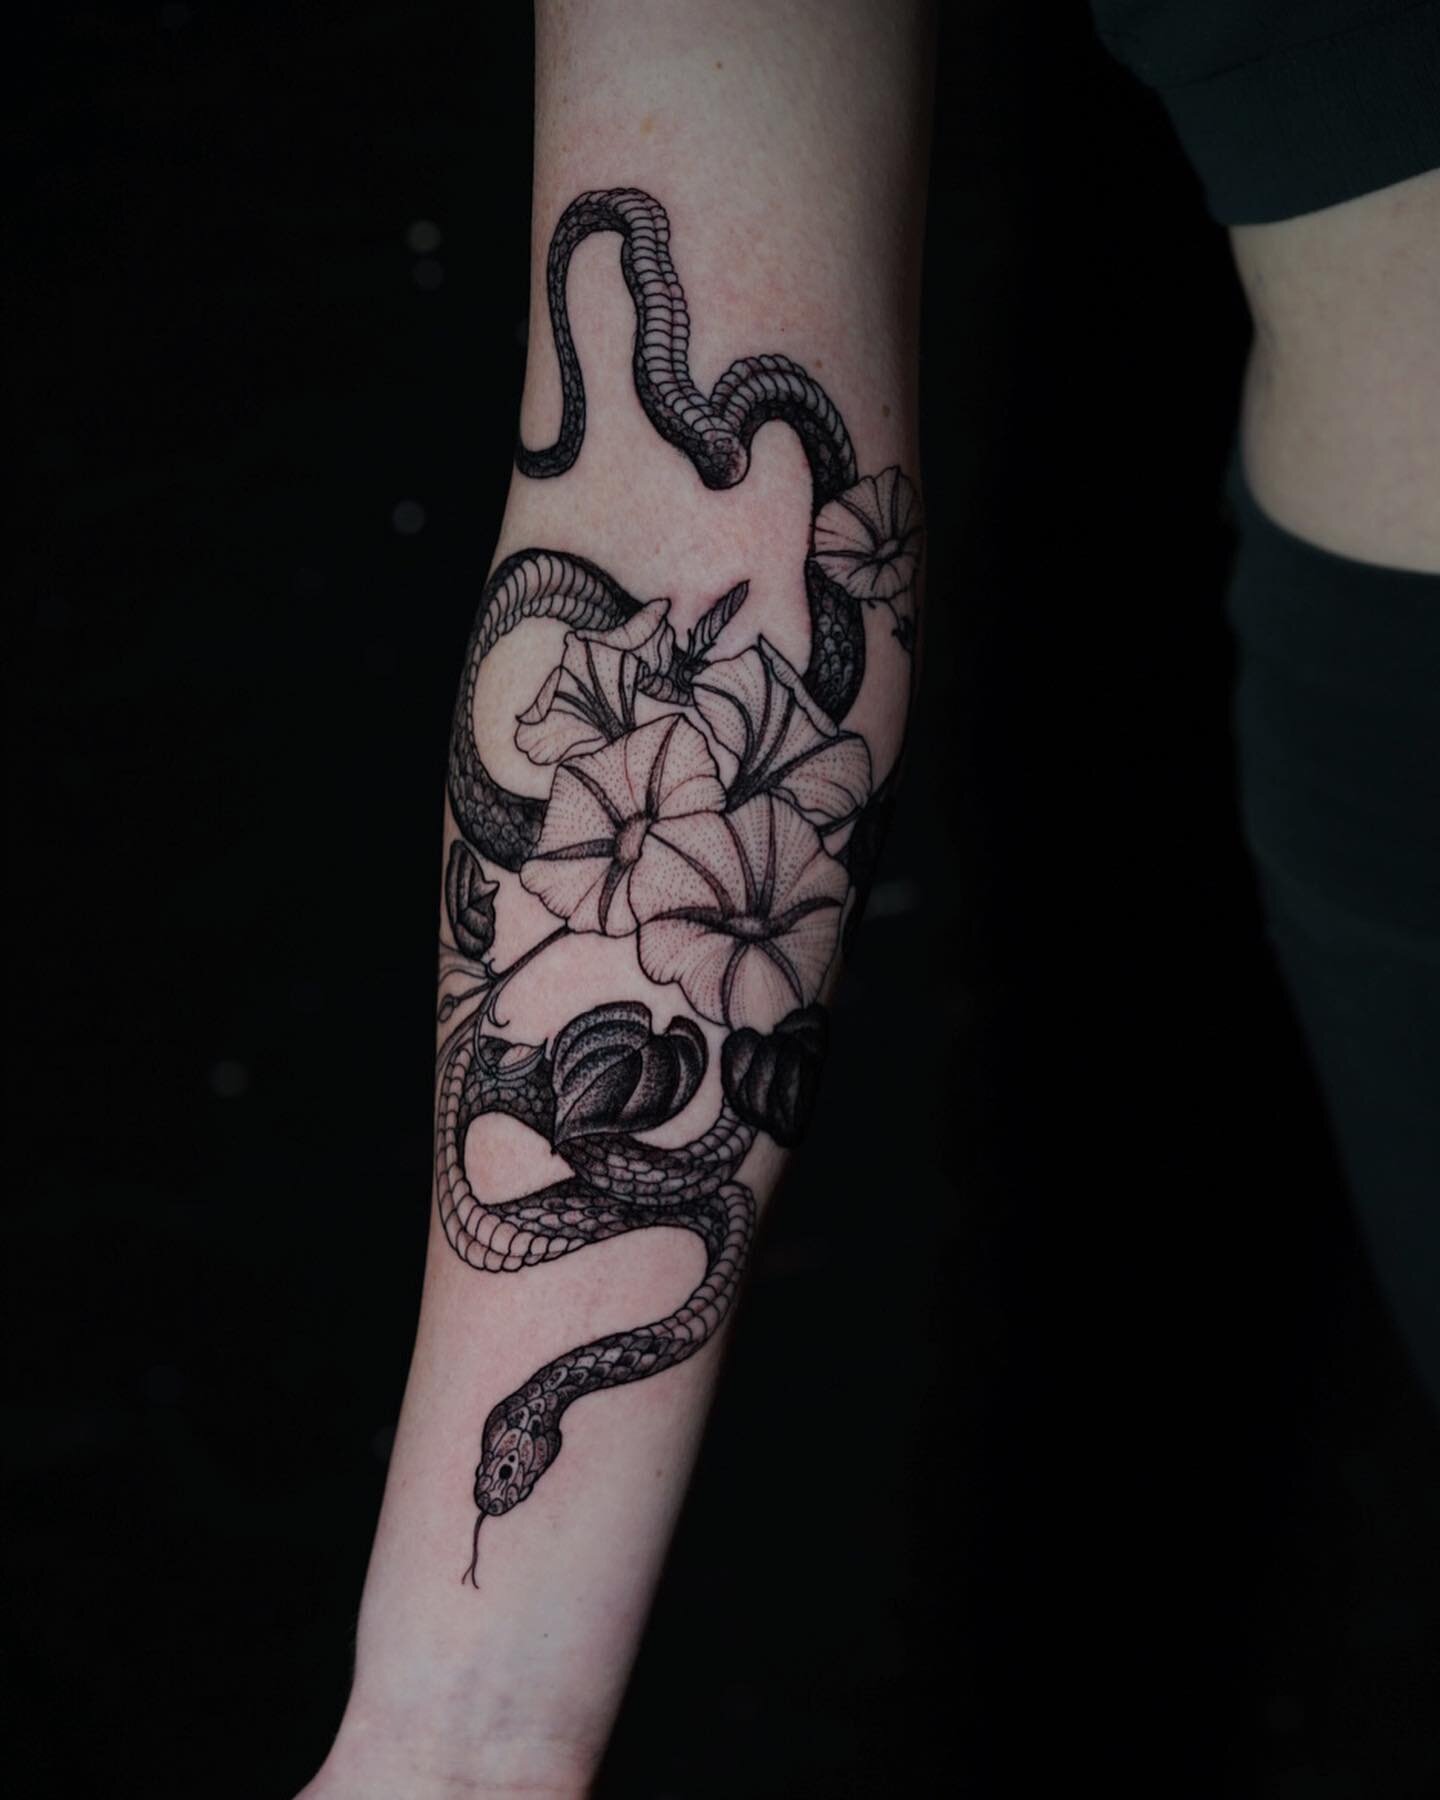 Snake and flowers for Greyson ✨ (also healed sunflowers) 
&bull;
#wehotattoo #weho #latattoo #latattooartist #nytattoo #snaketattoo #sunflowertattoo #blackworkerssubmission